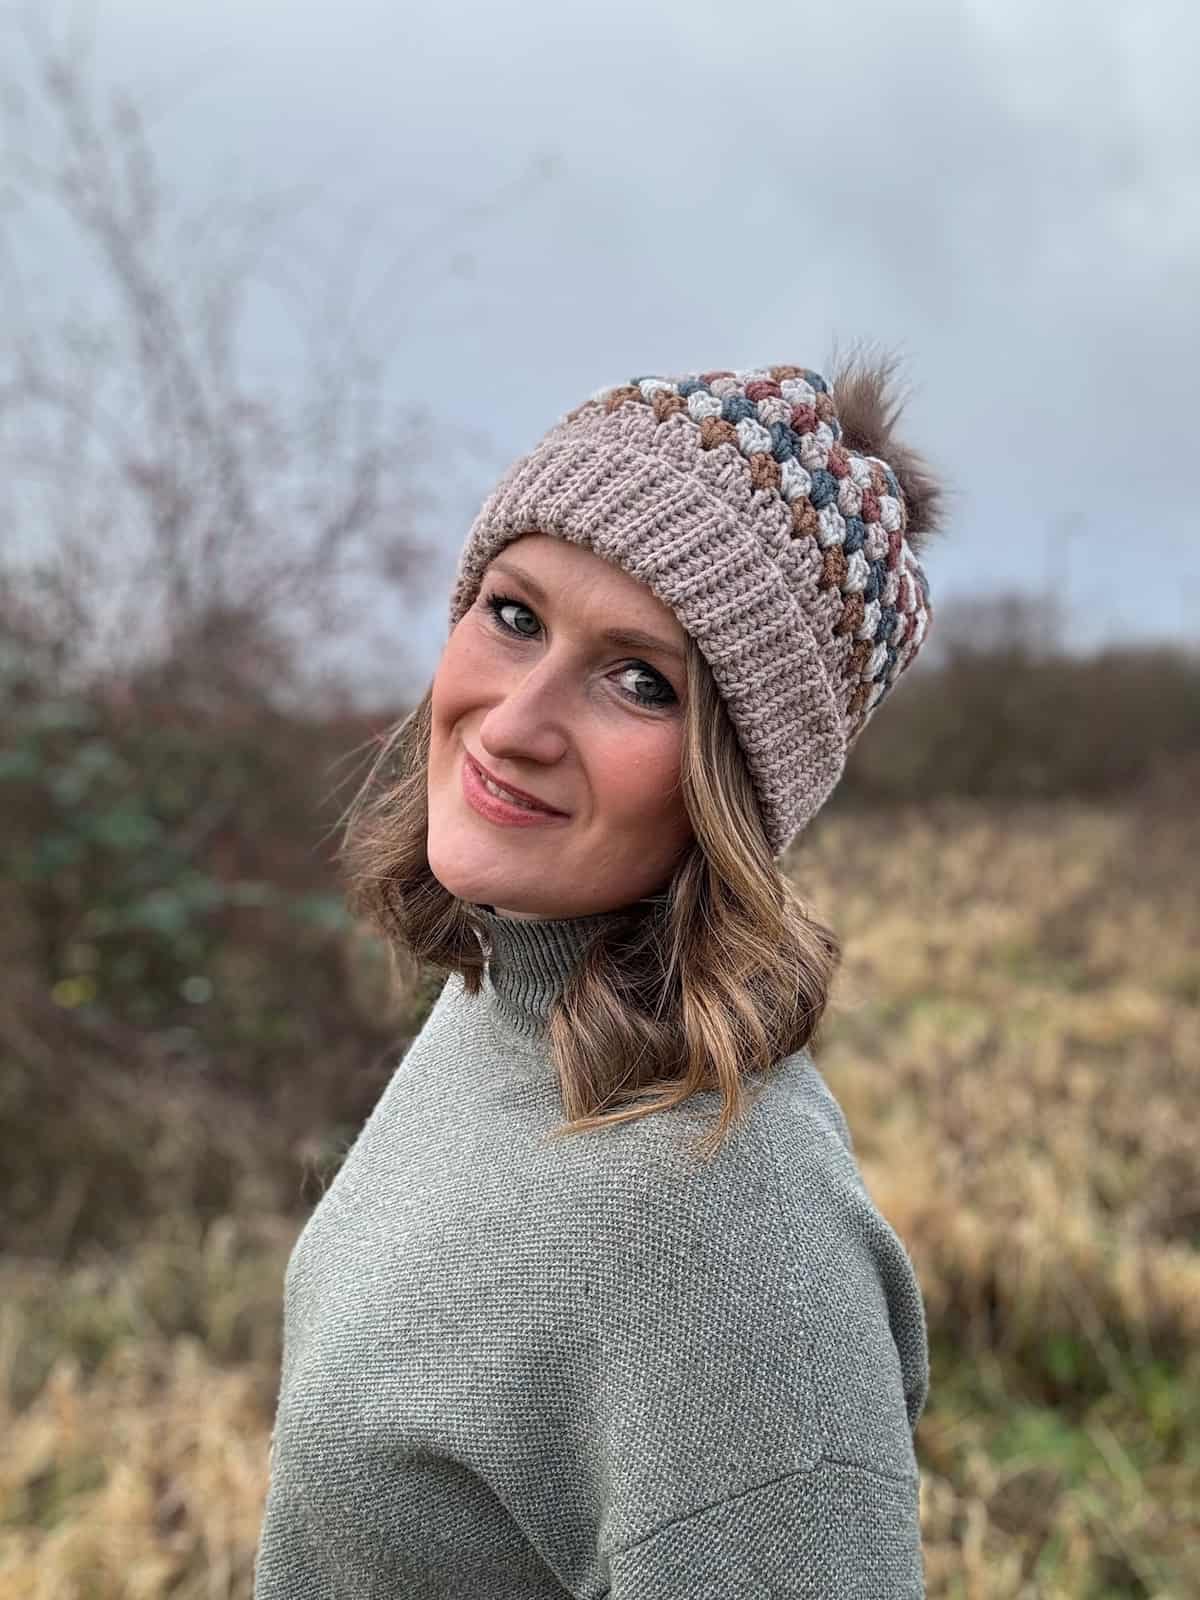 A woman wearing a knitted hat in a field.